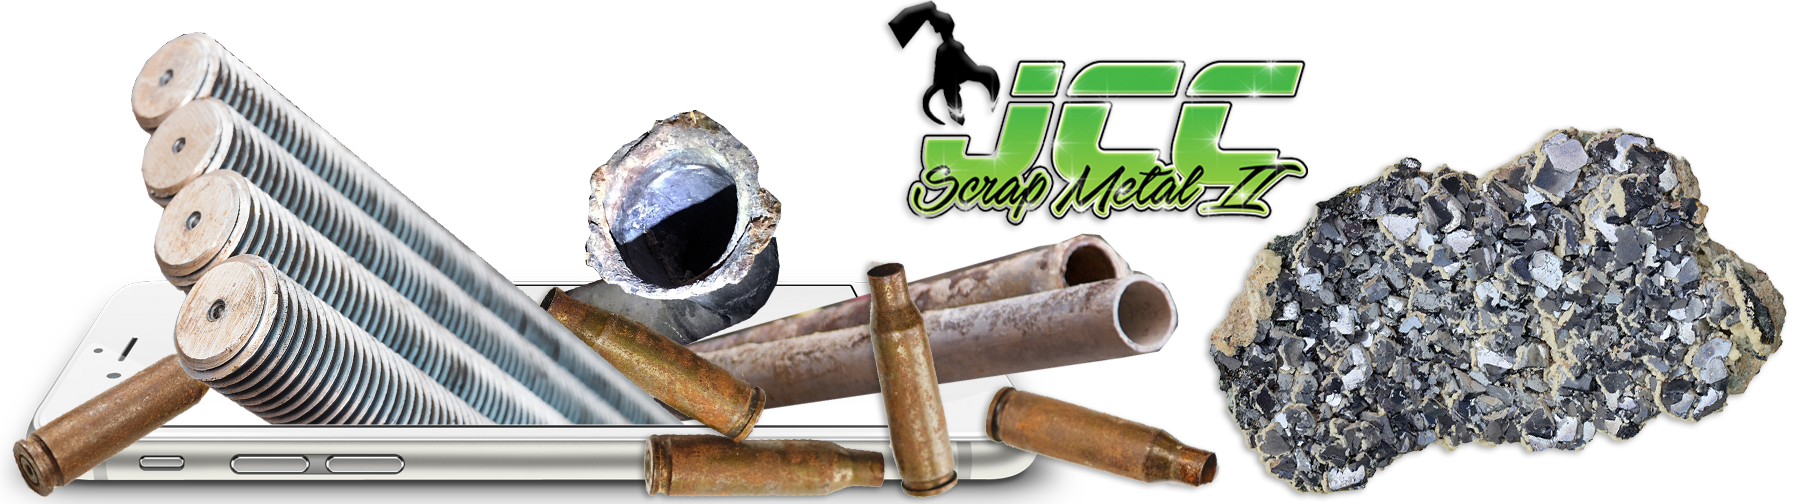 lead,Scrap Metal Recycling Professional Services, Lindenhurst, NY - Graphic | Suffolk County, Long Island, NY | JCC Scrap Metal II, 631-816-2000, jccscrapmetal2@gmail.com